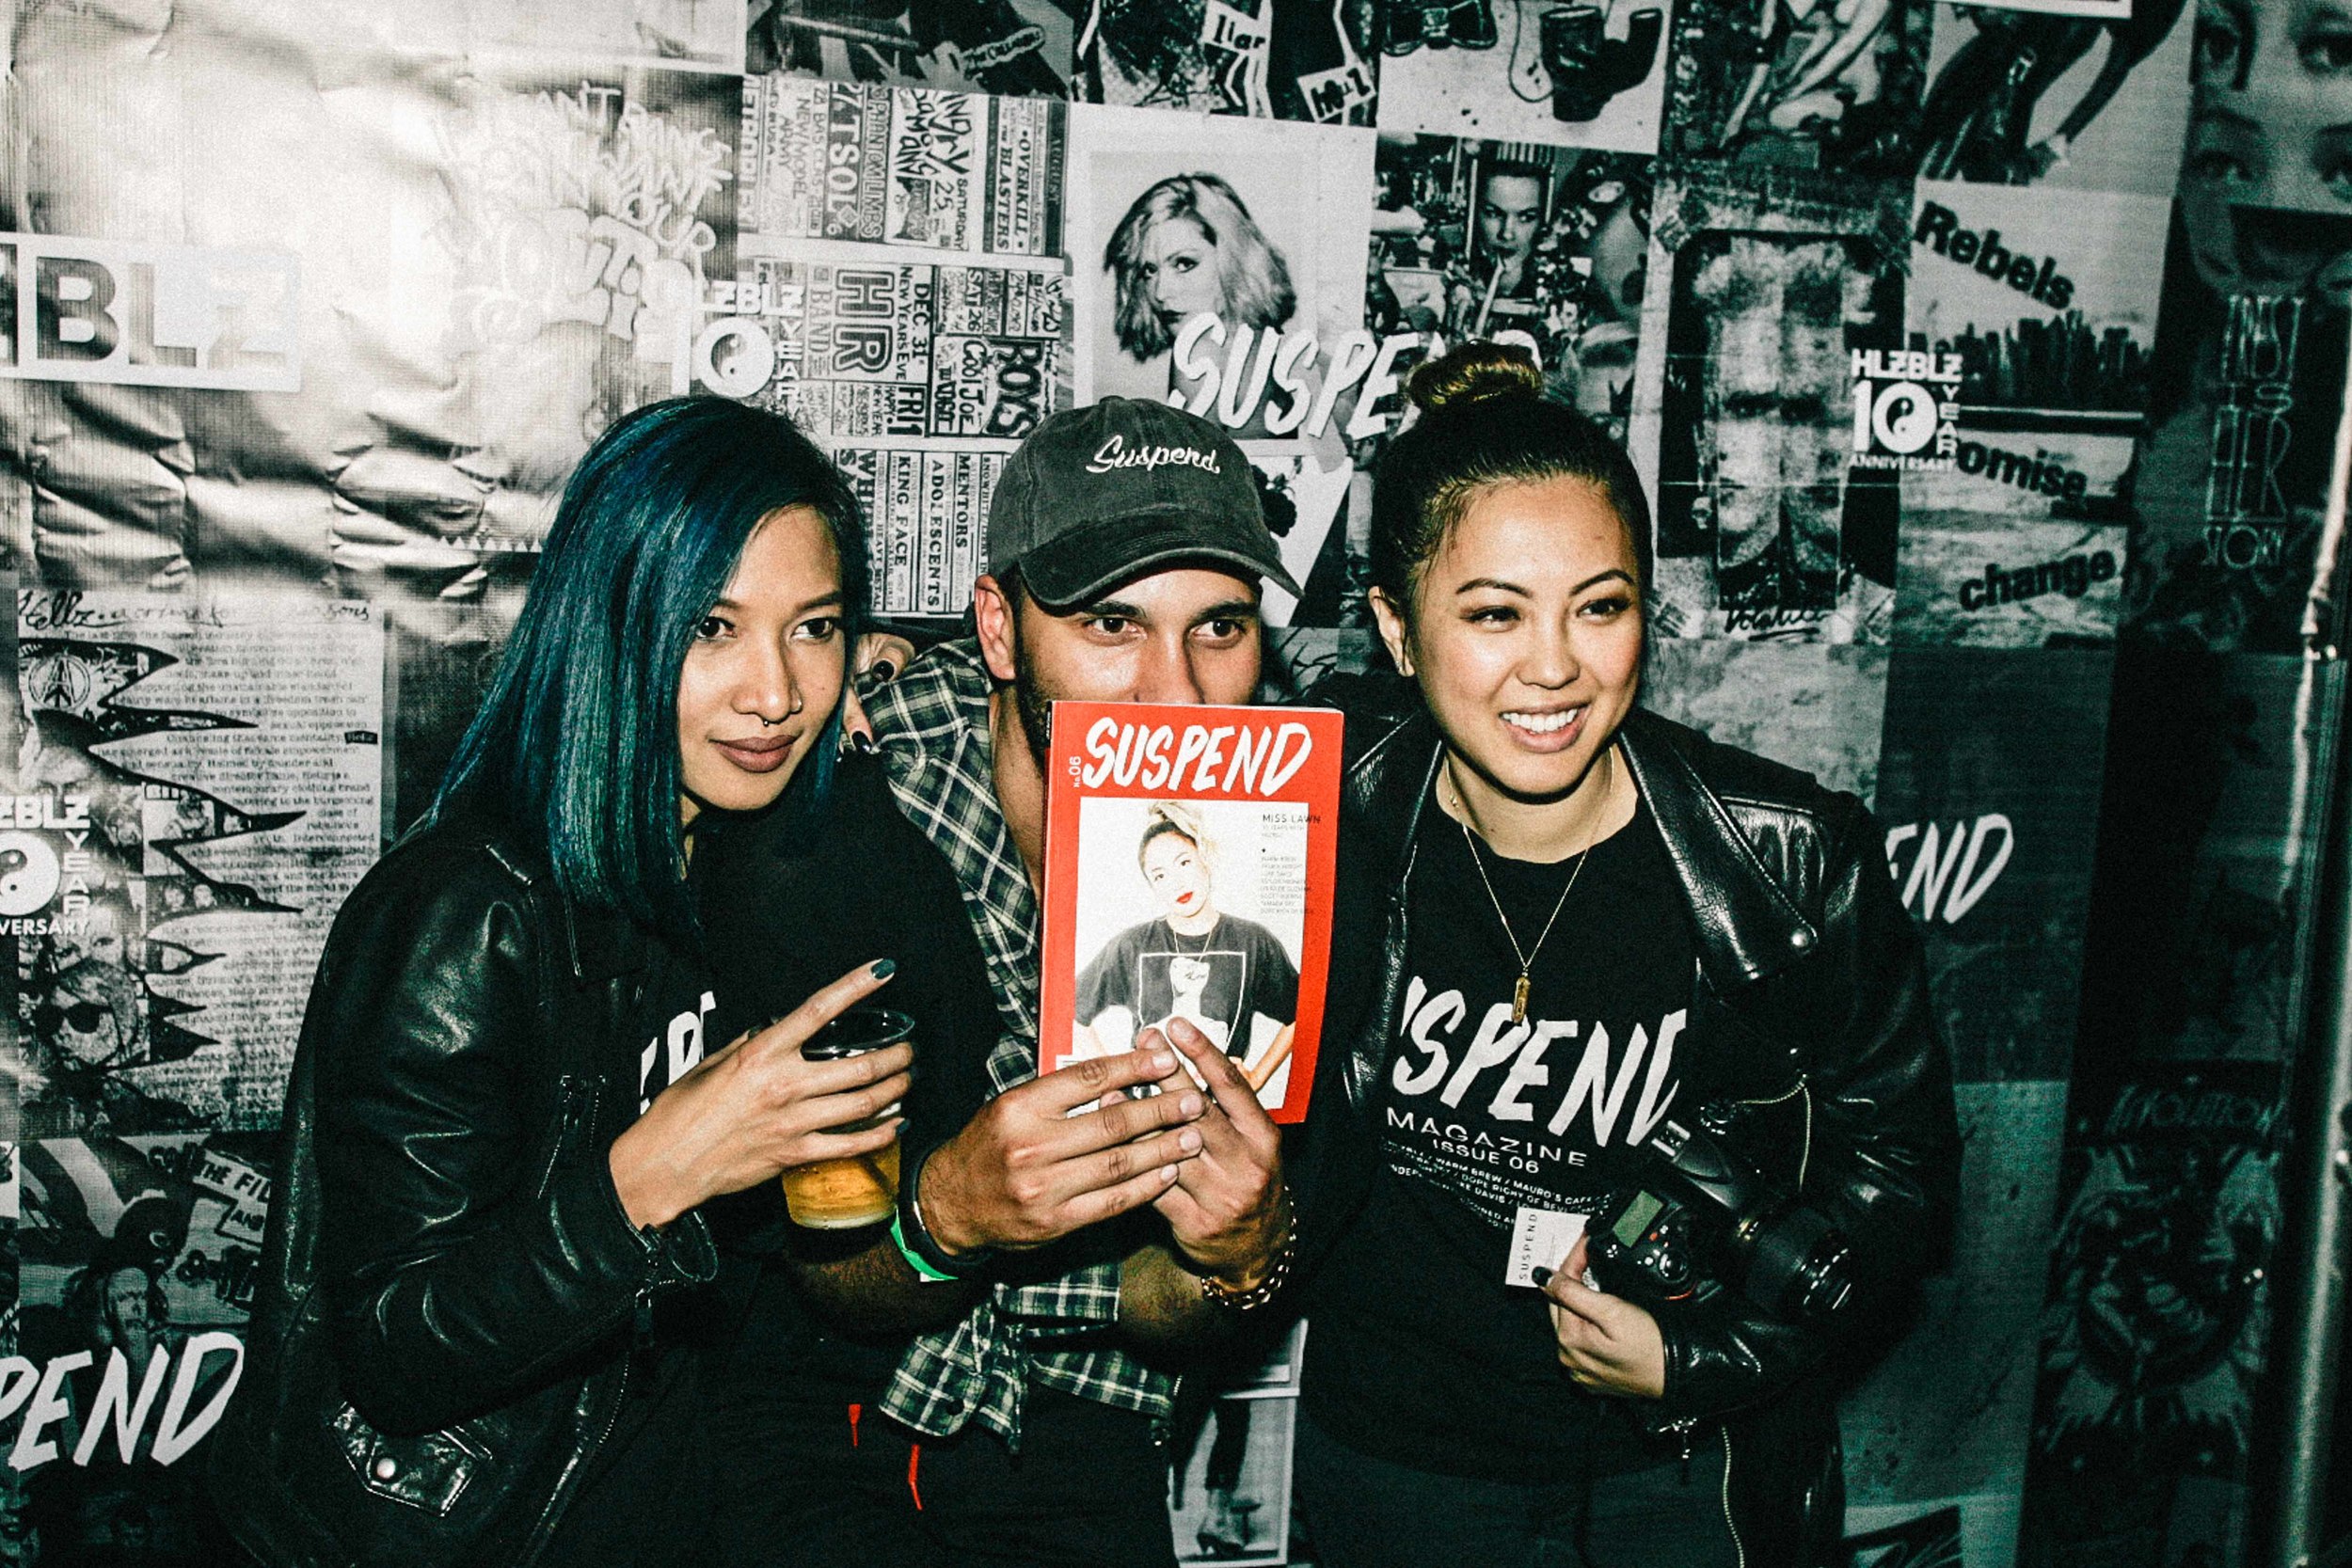  David Allen at the ISSUE 06 Release Party x 10YR HLZBLZ Anniversary (Feb 11) at Globe Theater. / Photo: © Jonathan Tate for SUSPEND Magazine. 